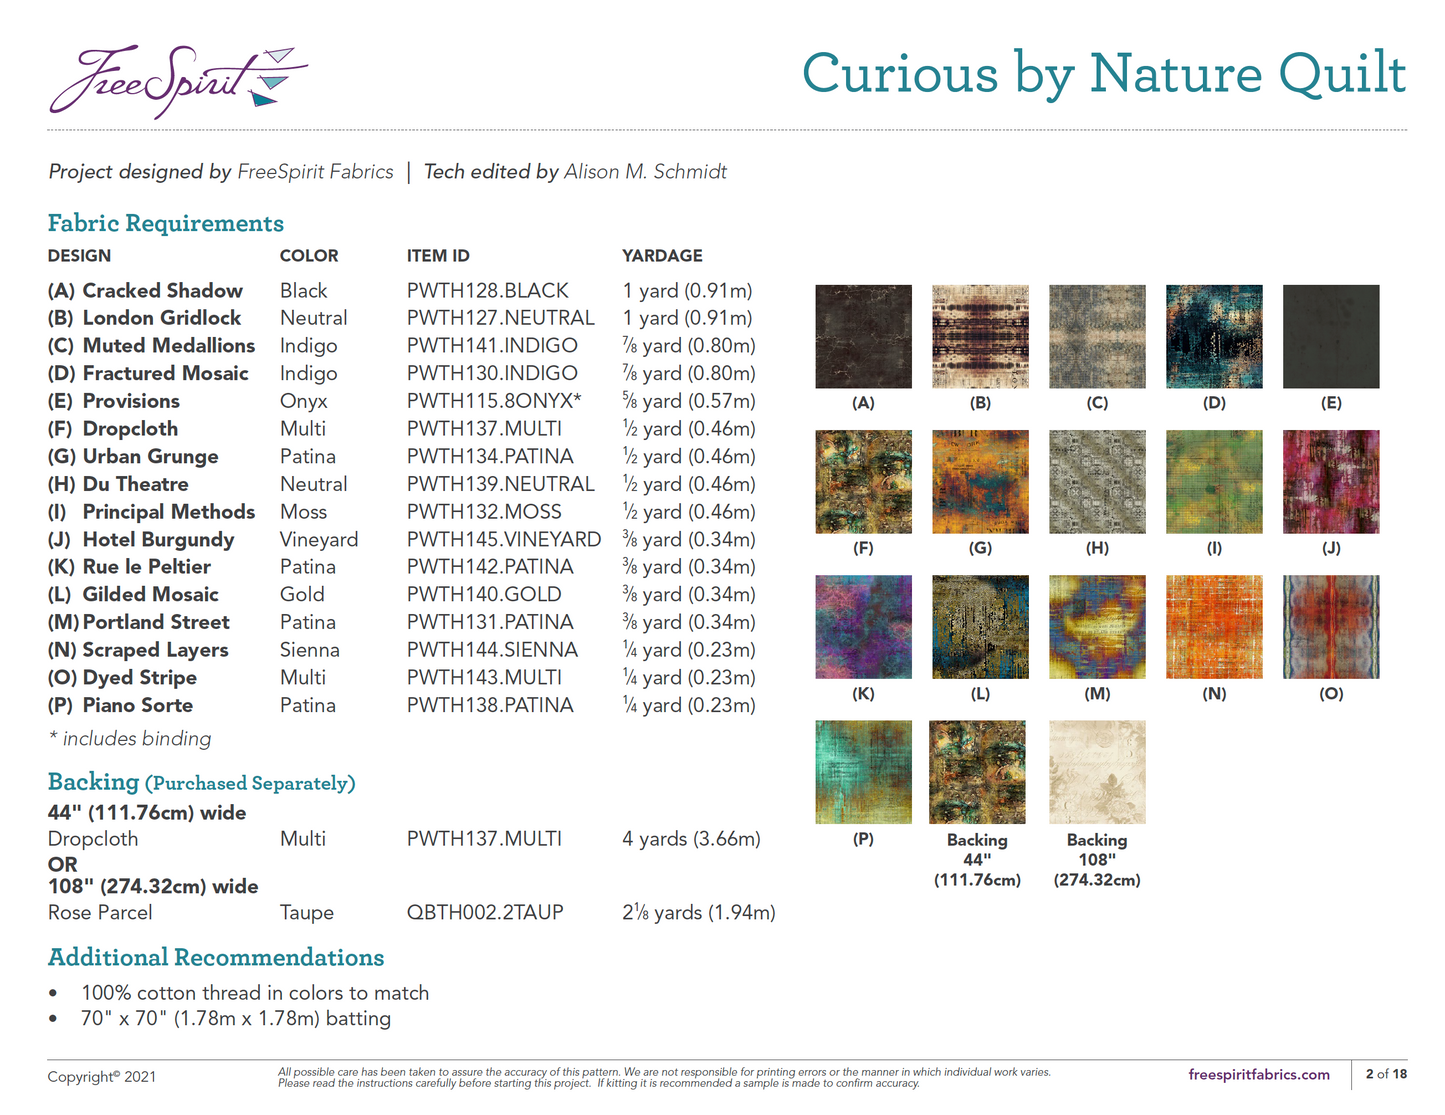 Free Pattern - Curious by Nature Quilt by Freespirit for Tim Holtz Abandoned fabrics